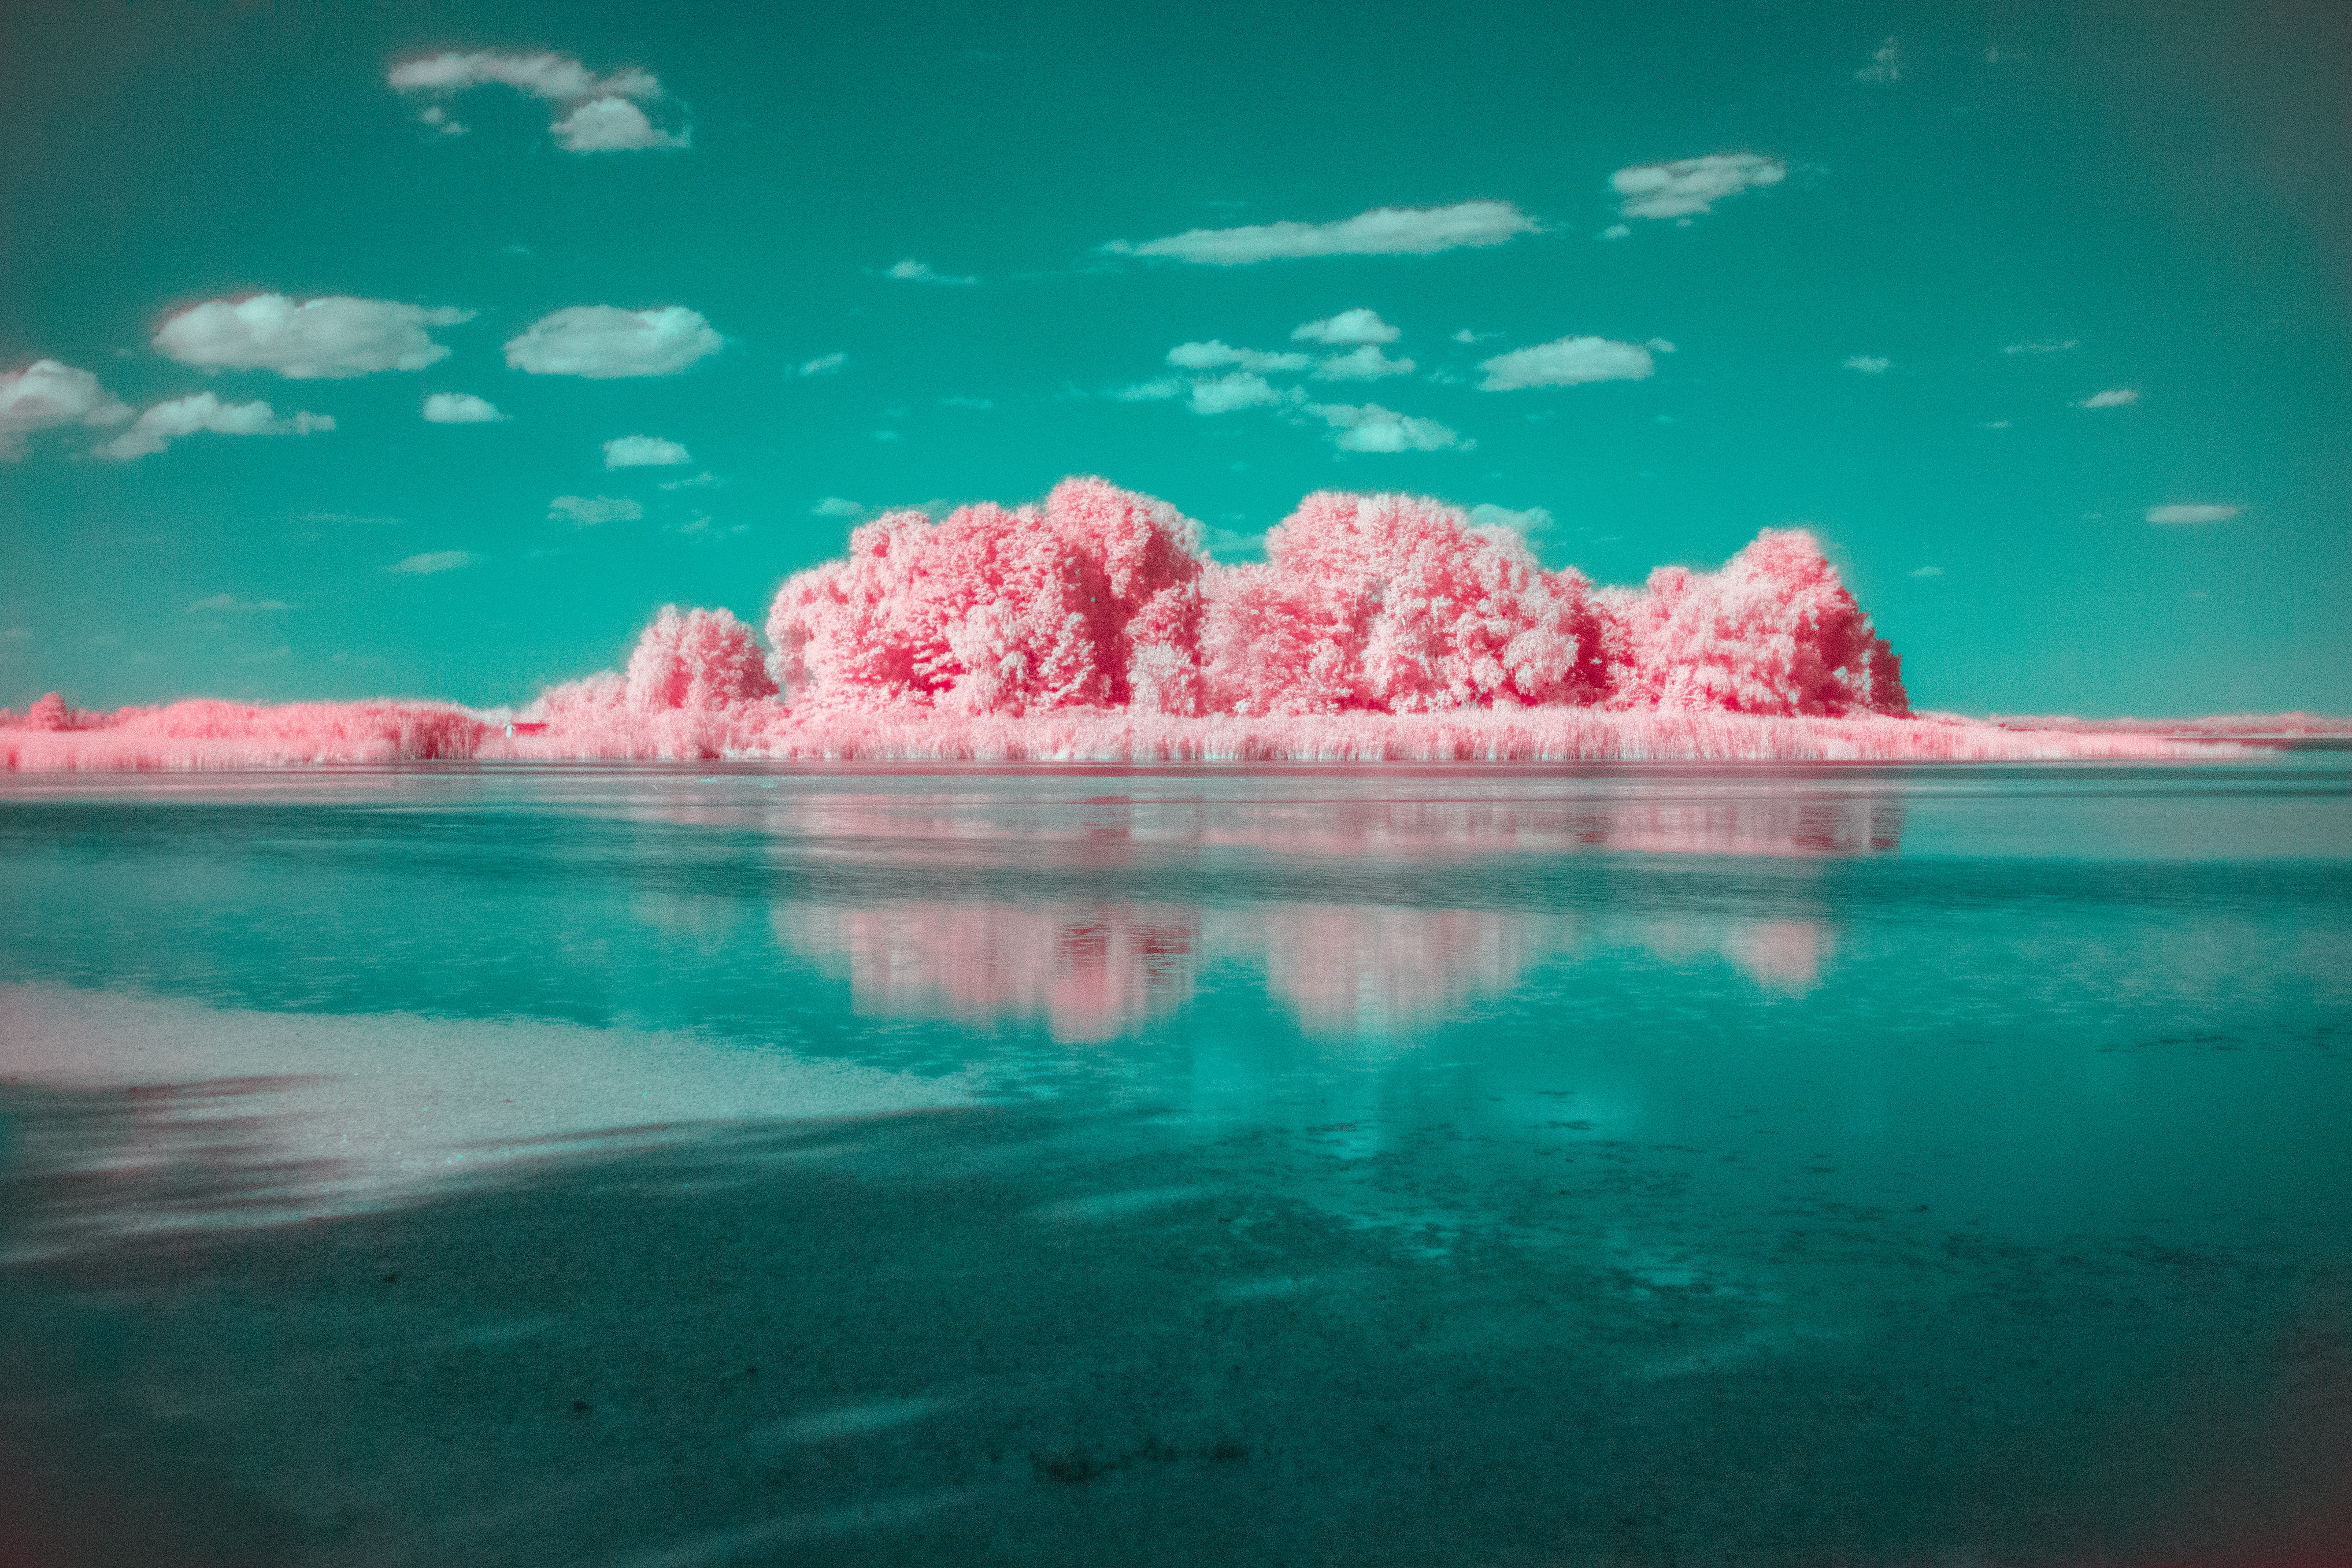 Photography Infrared 4k Ultra HD Wallpaper by Andrii Ganzevych